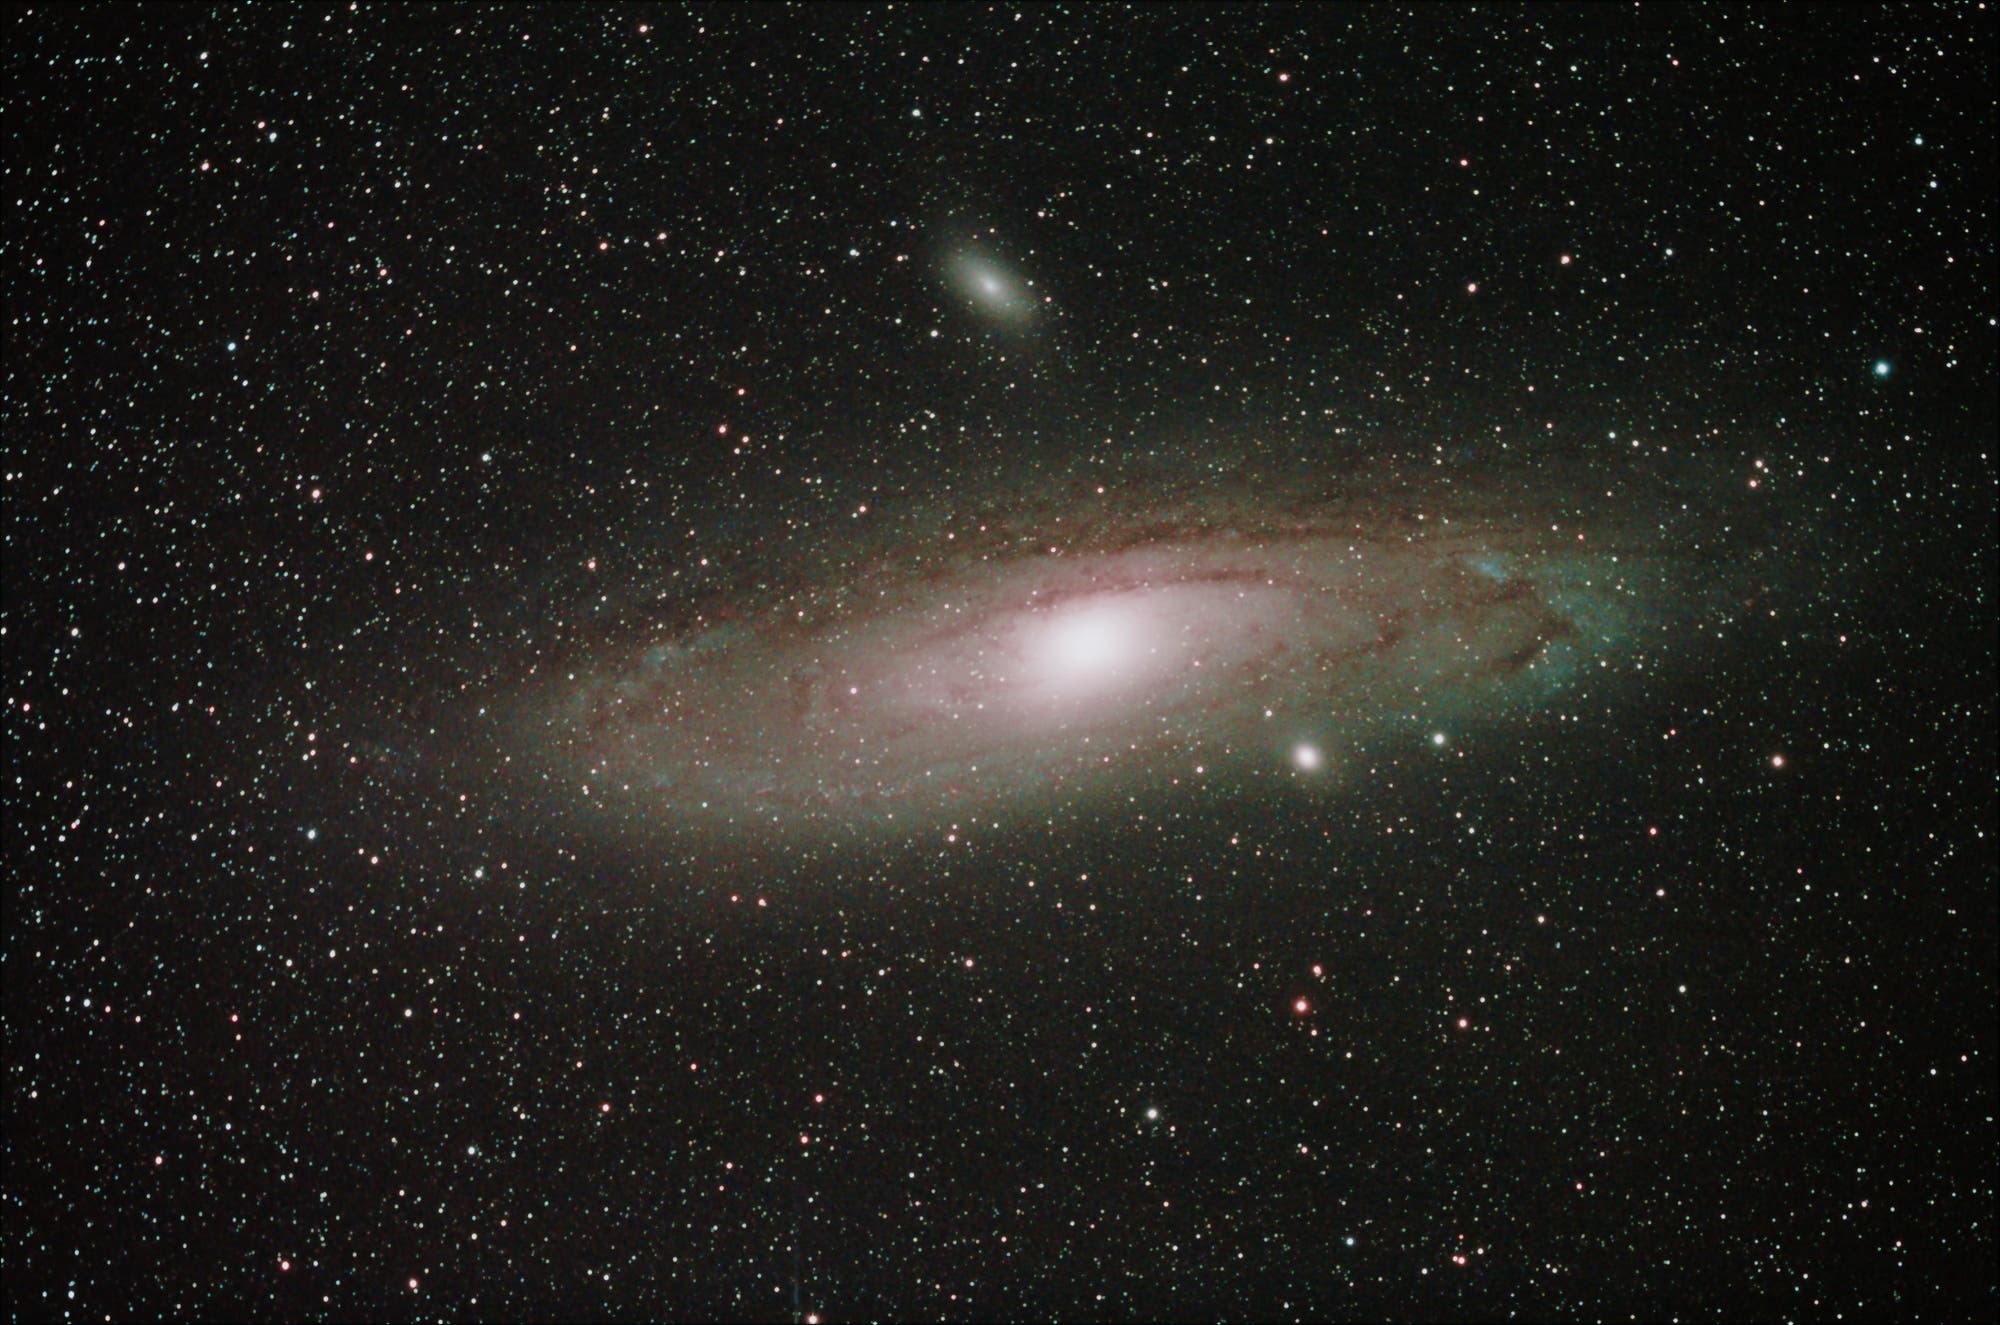 Andromedagalaxie Messier 31